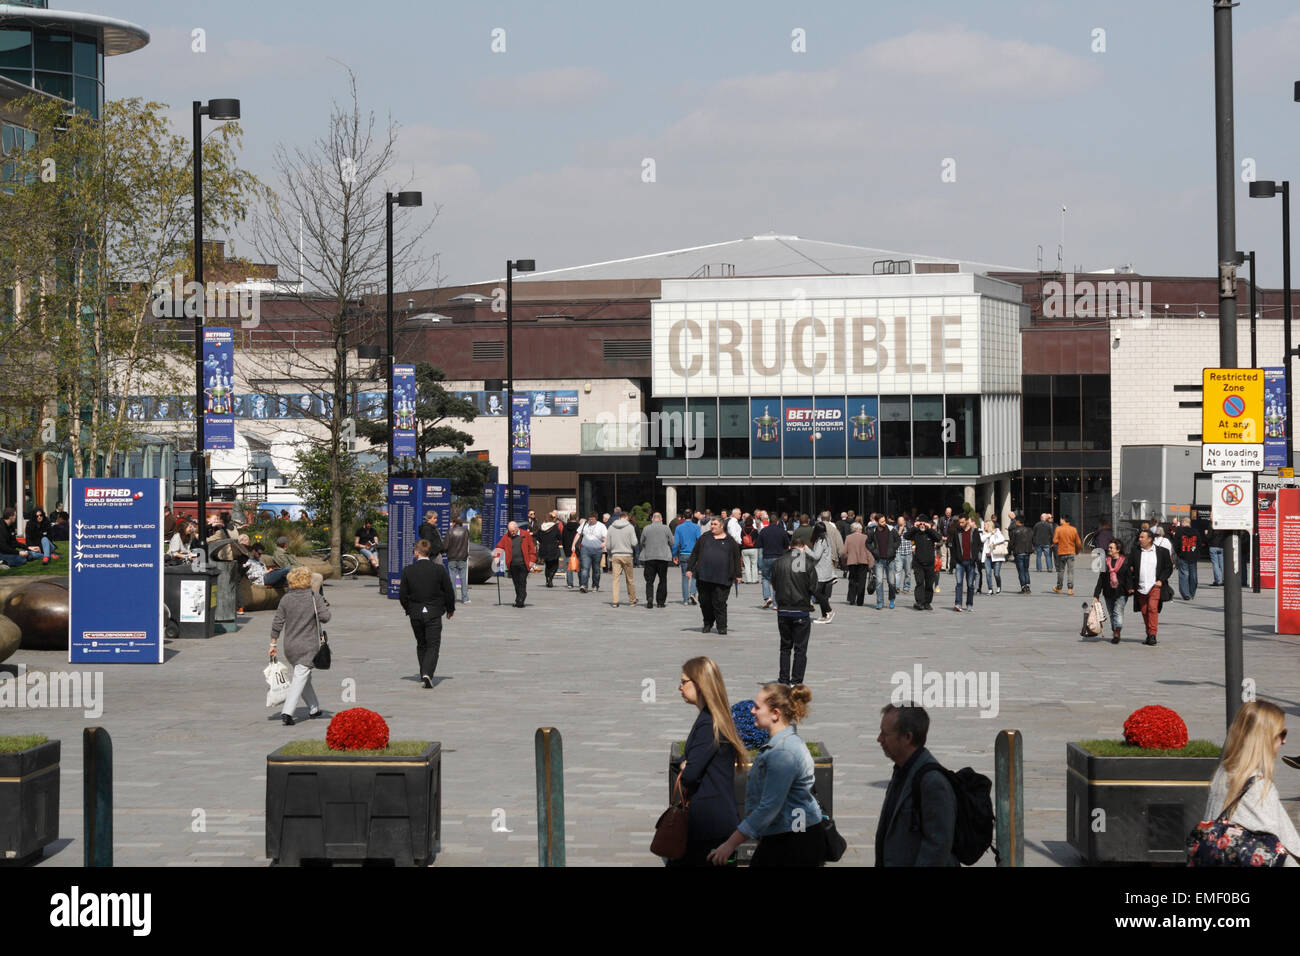 Crucible Theatre and Tudor square in Sheffield city centre England, crowds for the World snooker Championship 2015 Stock Photo